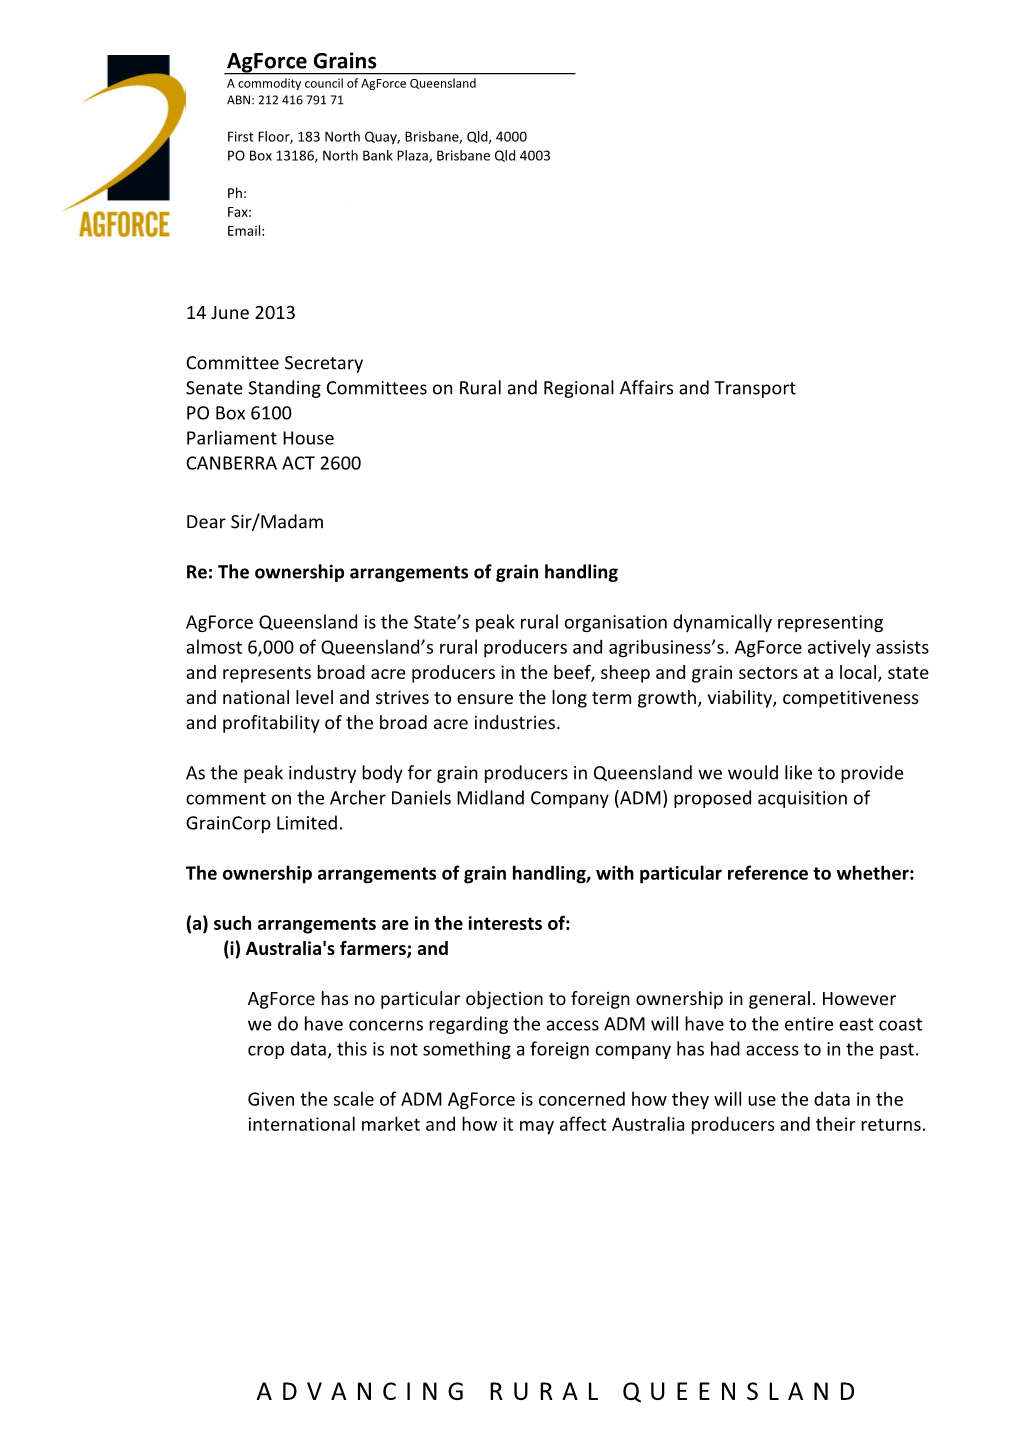 Submission to Senate Committee Re ADM Takeover of Graincorp With